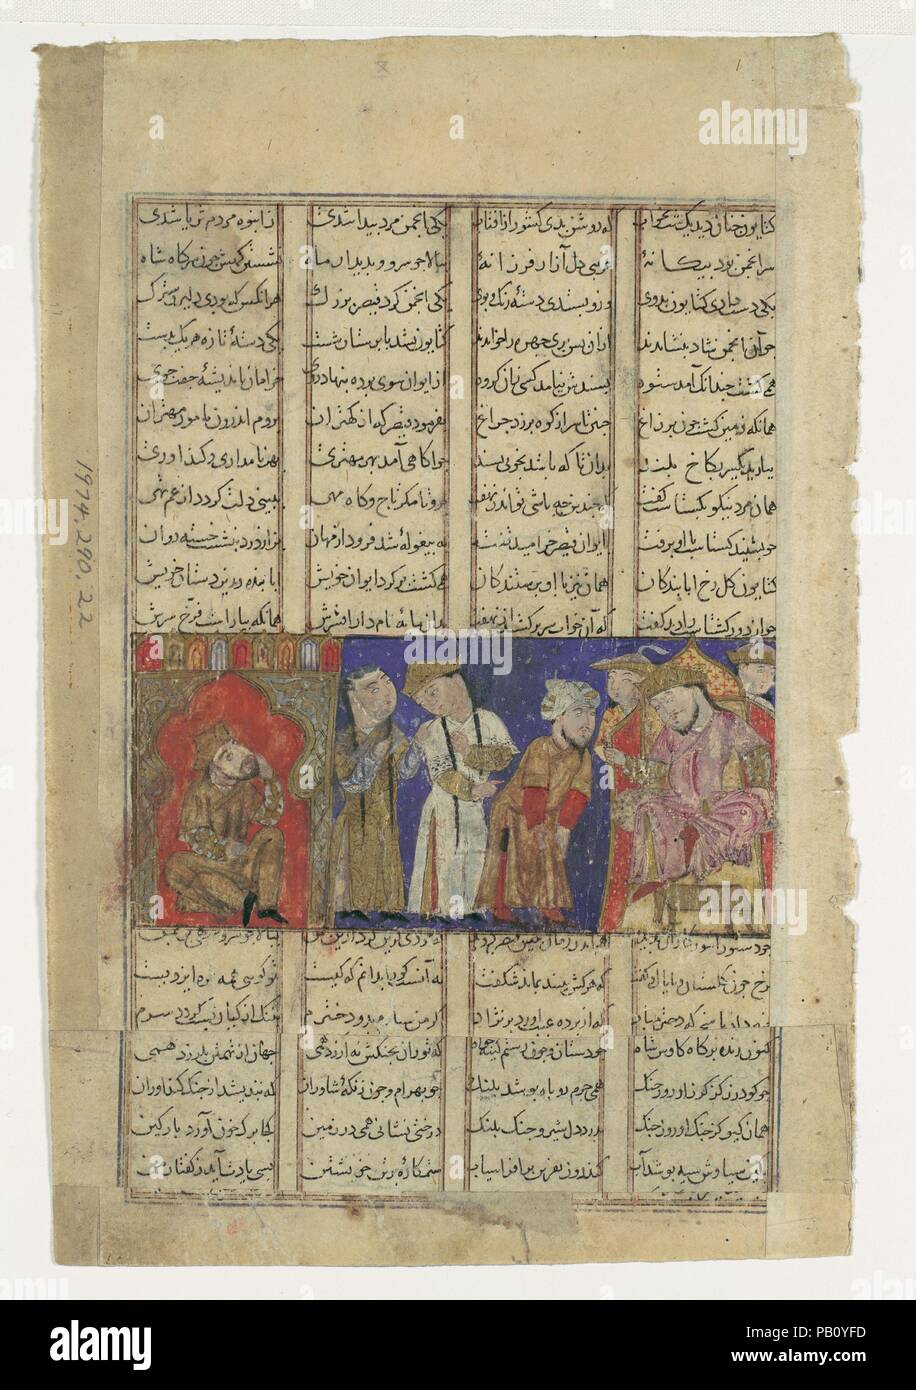 'Caesar Gives his Daughter Katayun to Gushtasp', Folio from a Shahnama (Book of Kings) of Firdausi. Author: Abu'l Qasim Firdausi (935-1020). Dimensions: Painting: H. 1 15/16 in. (4.9 cm)   W. 4 3/16 in. (10.6 cm)  Page: H. 8 1/16 in. (20.5 cm)   W. 5 5/16 in. (13.5 cm)  Mat: H. 19 1/4 in. (48.9 cm)   W. 14 1/4 in. (36.2 cm). Date: ca. 1330-40.  In the court of Rum (the Roman Empire) it was customary for a princess to select her husband from among the assembled nobles.  Katayun chose Gushtasp, whom she had seen in a dream.  Her father Caesar was dismayed, not realizing that Gushtasp was actuall Stock Photo